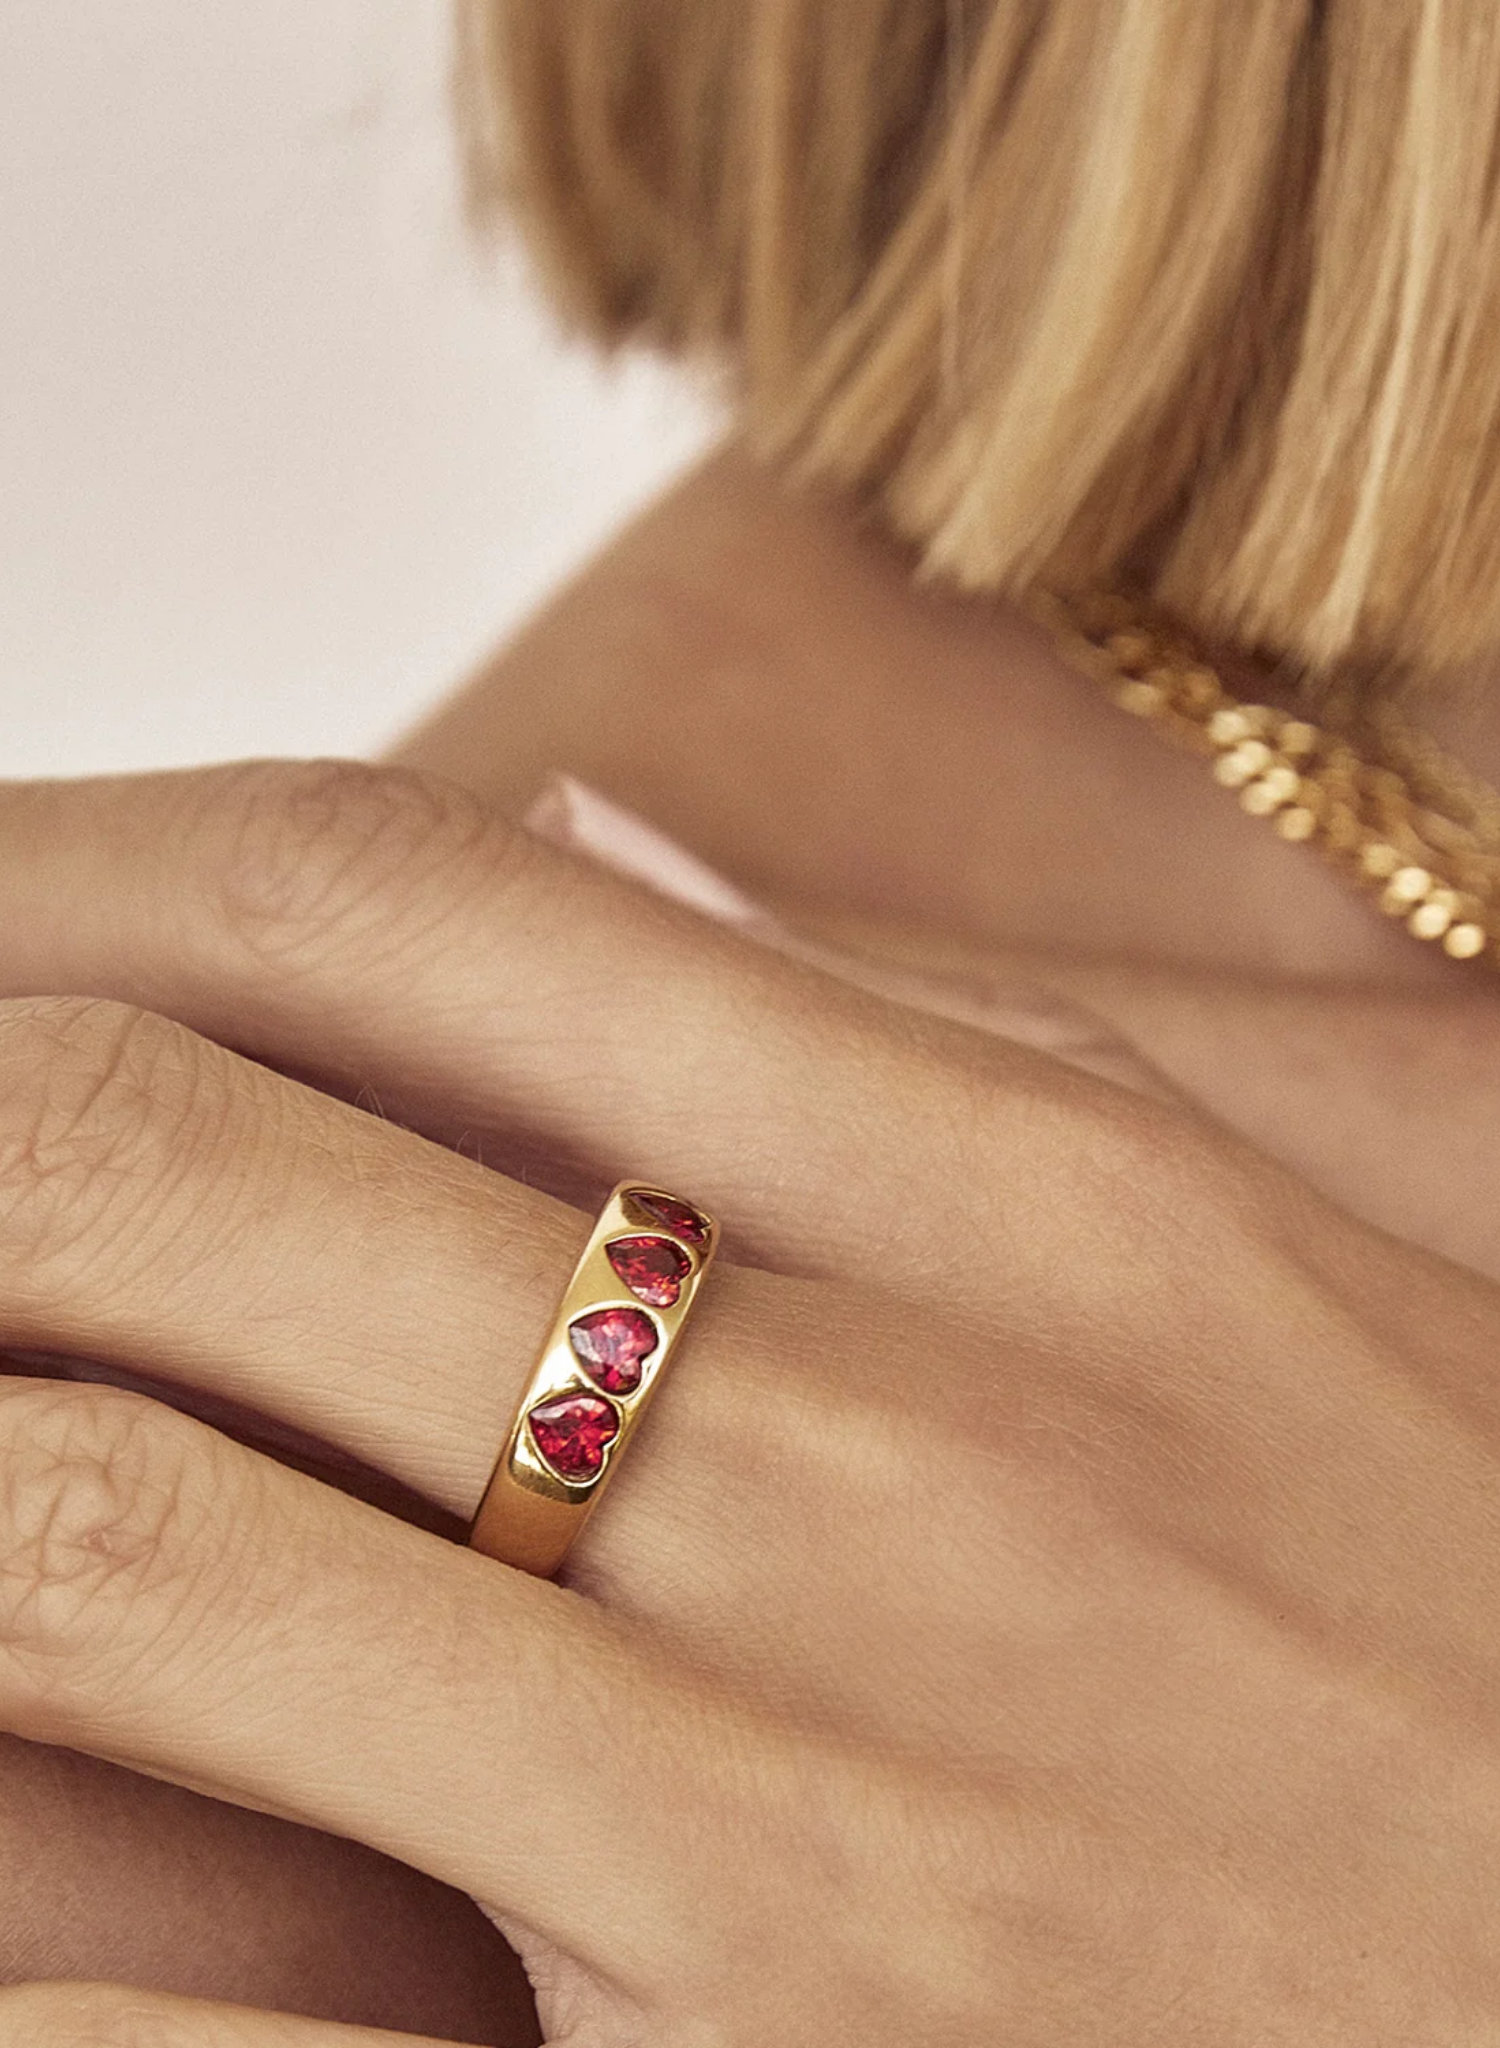 J'Adore Heart Ring